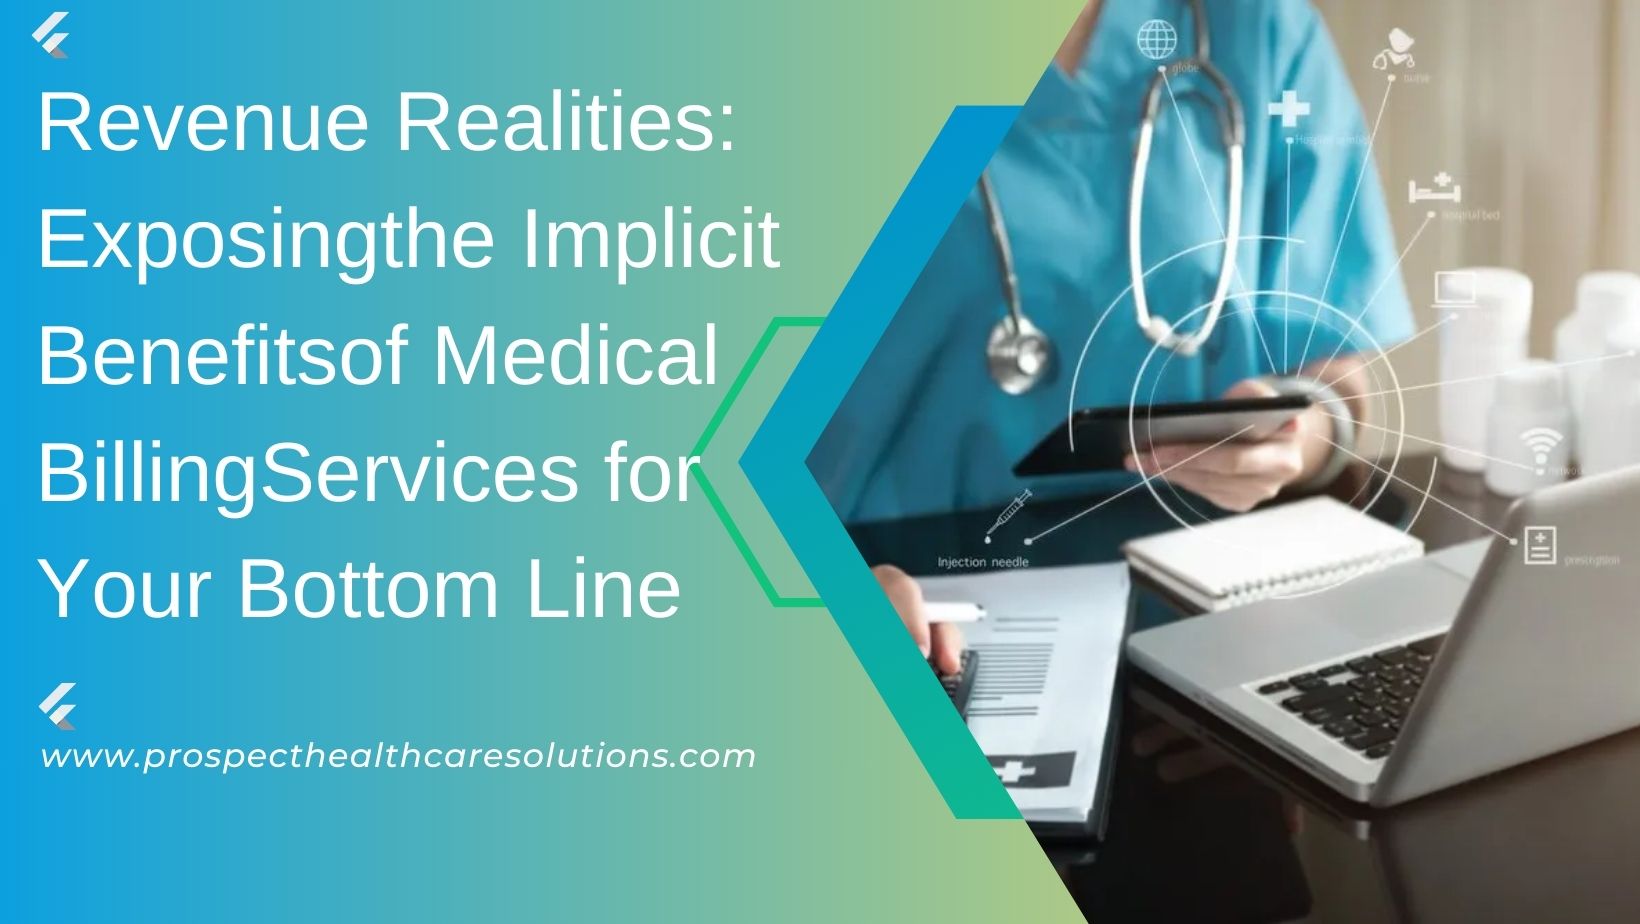 Revenue Realities: Exposing the Implicit Benefits of Medical Billing Services for Your Bottom Line